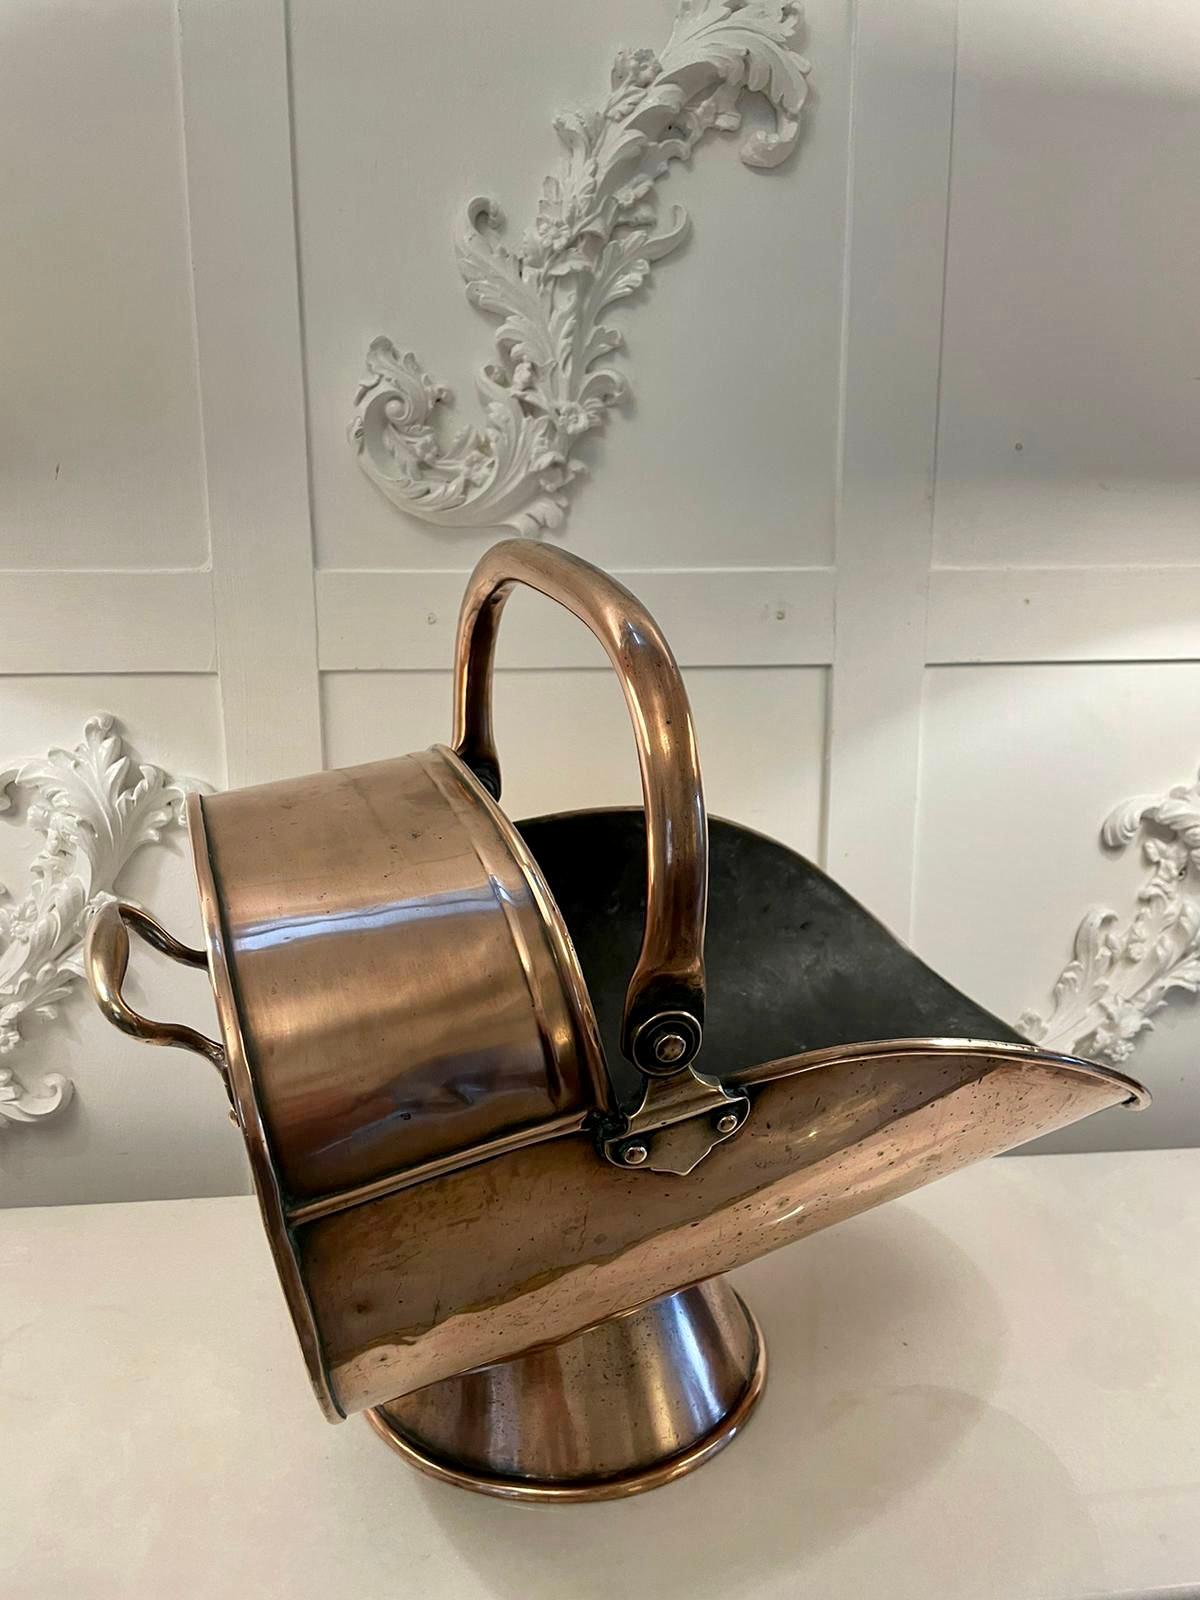 Quality antique George III copper coal scuttle having a swing carrying handle, shaped handle to the back standing on a circular base.

Measures: H 36 x W 50 x D 28cm
Date 1800
 